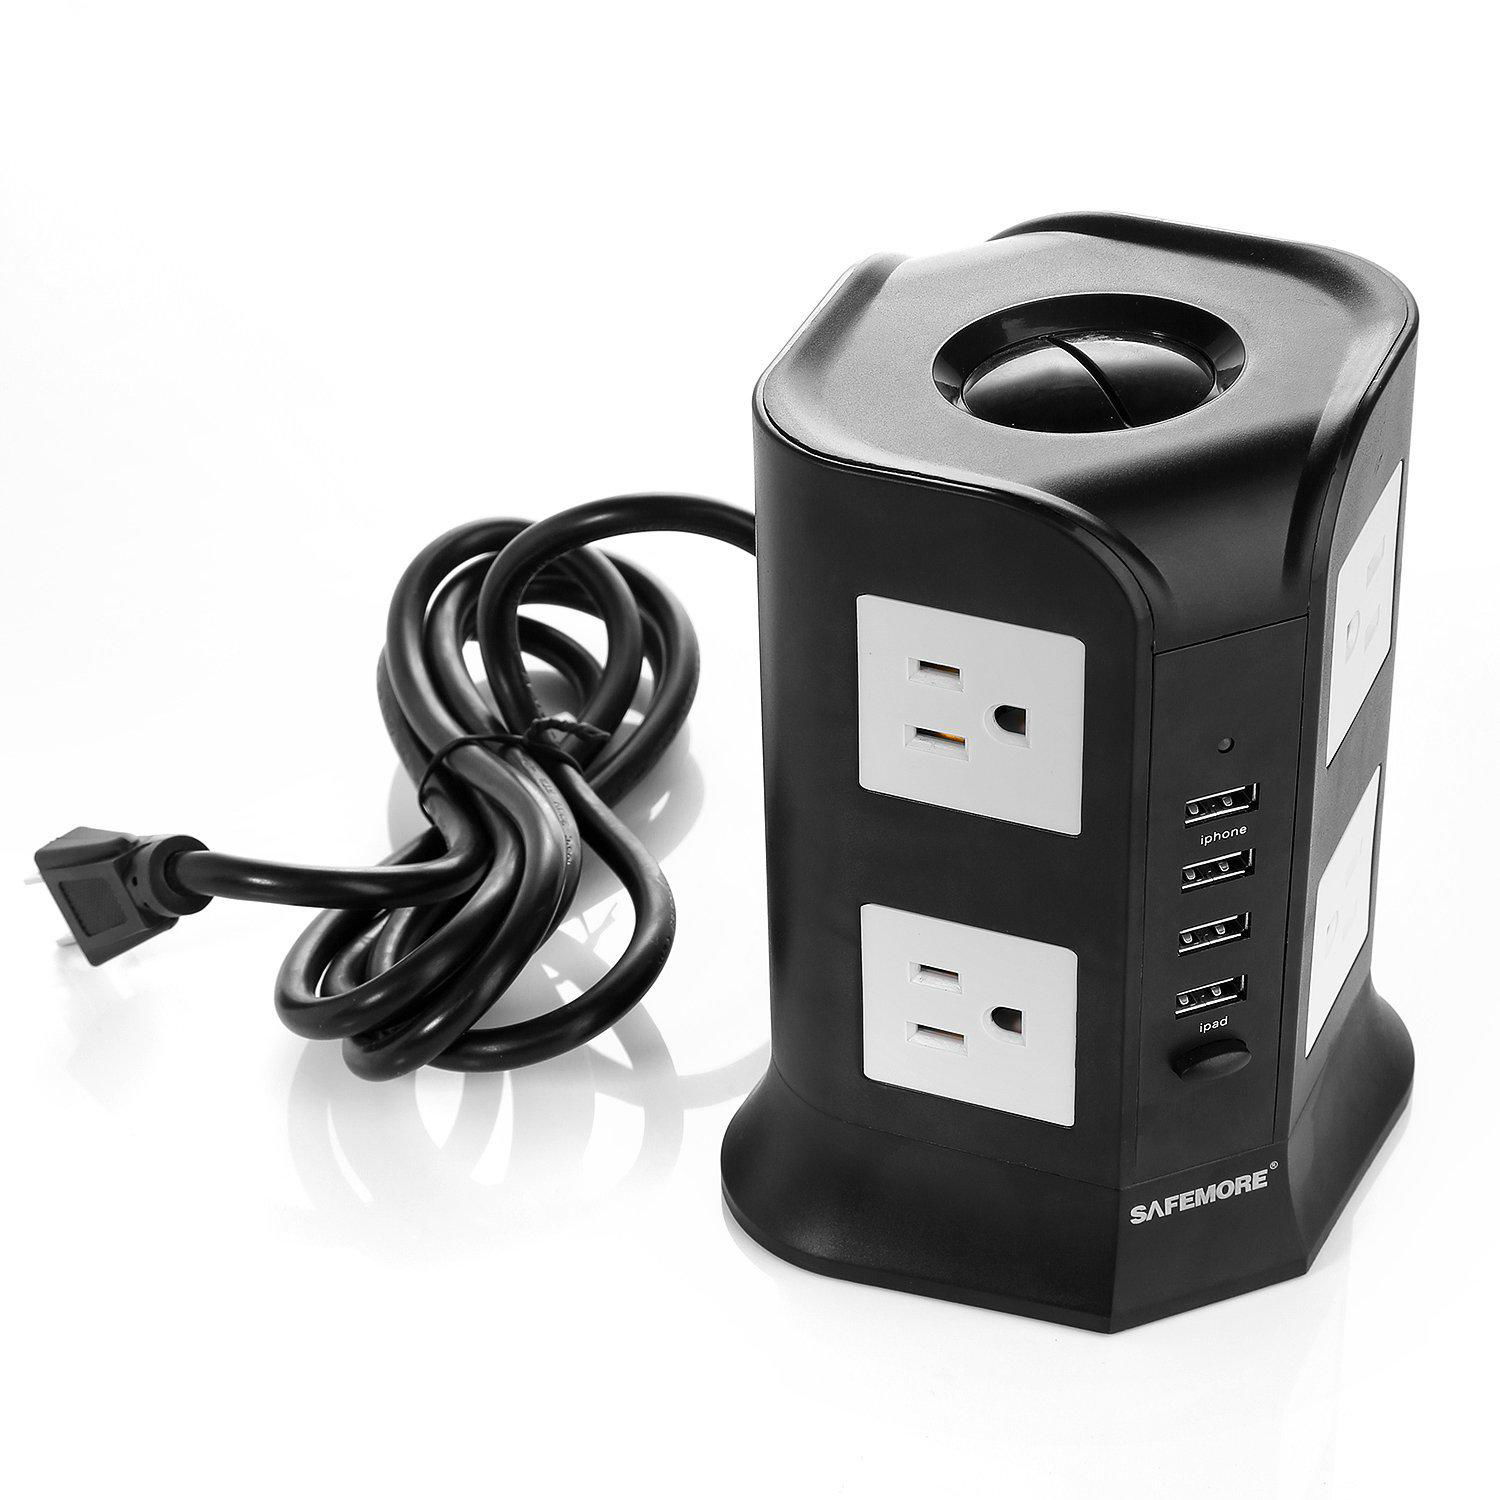 Safemore Power Strip Surge Protector Smart 8-Outlet with 4-USB Ports Socket Blac 5